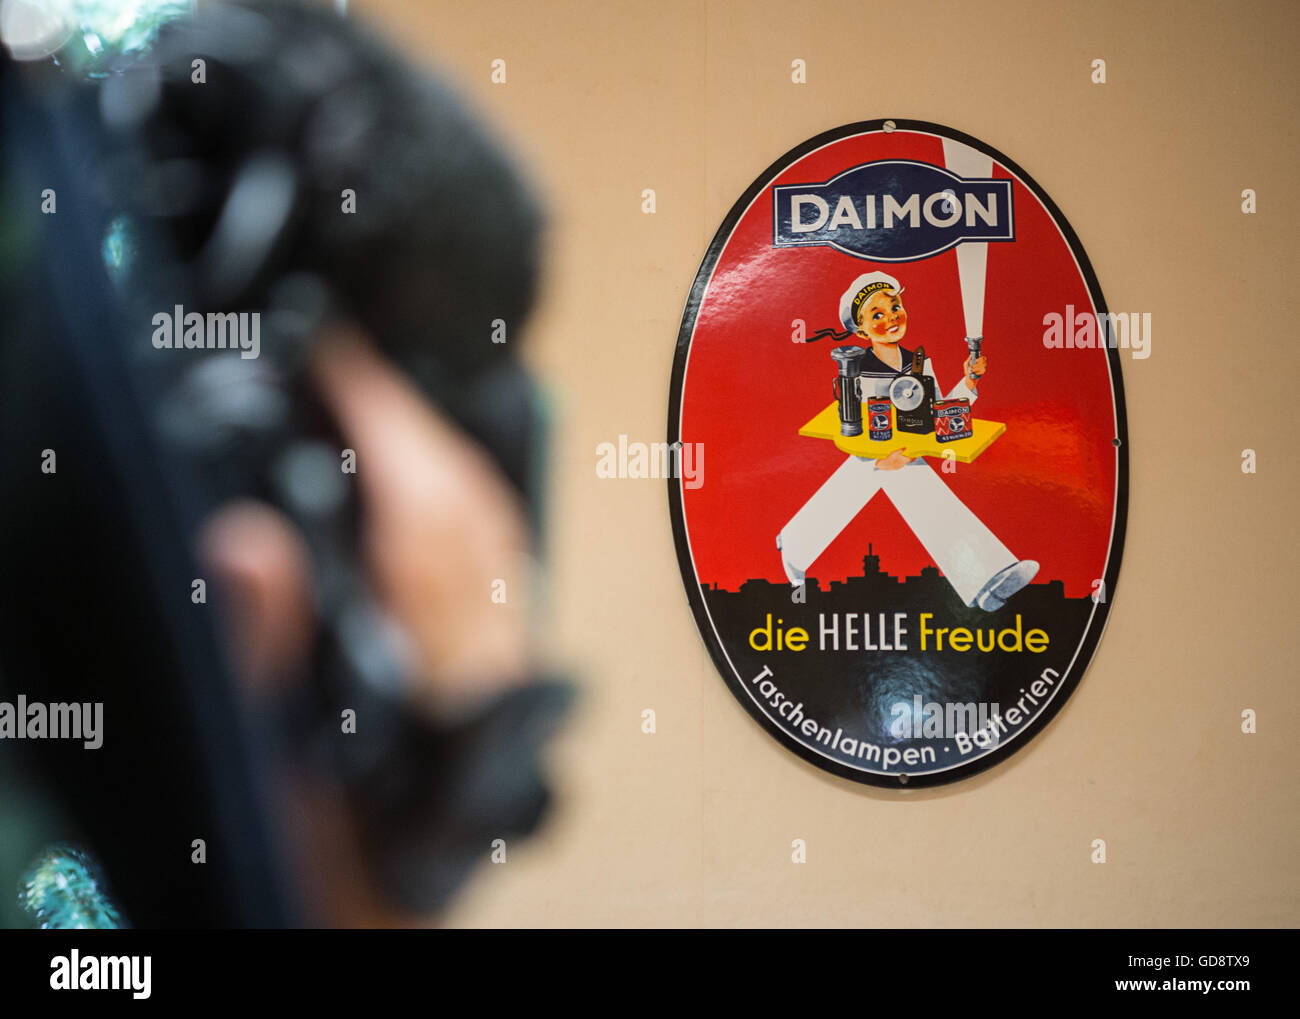 Berlin, Germany. 13th July, 2016. A cameraman films an old advertising board by the company Daimon at the opening of the Daimon Museum in Berlin, Germany, 13 July 2016. The museum is dedicated to the inventor of flashlights, Paul Schmidt, who also founded the company Daimon. Photo: Wolfram Kastl/dpa/Alamy Live News Stock Photo